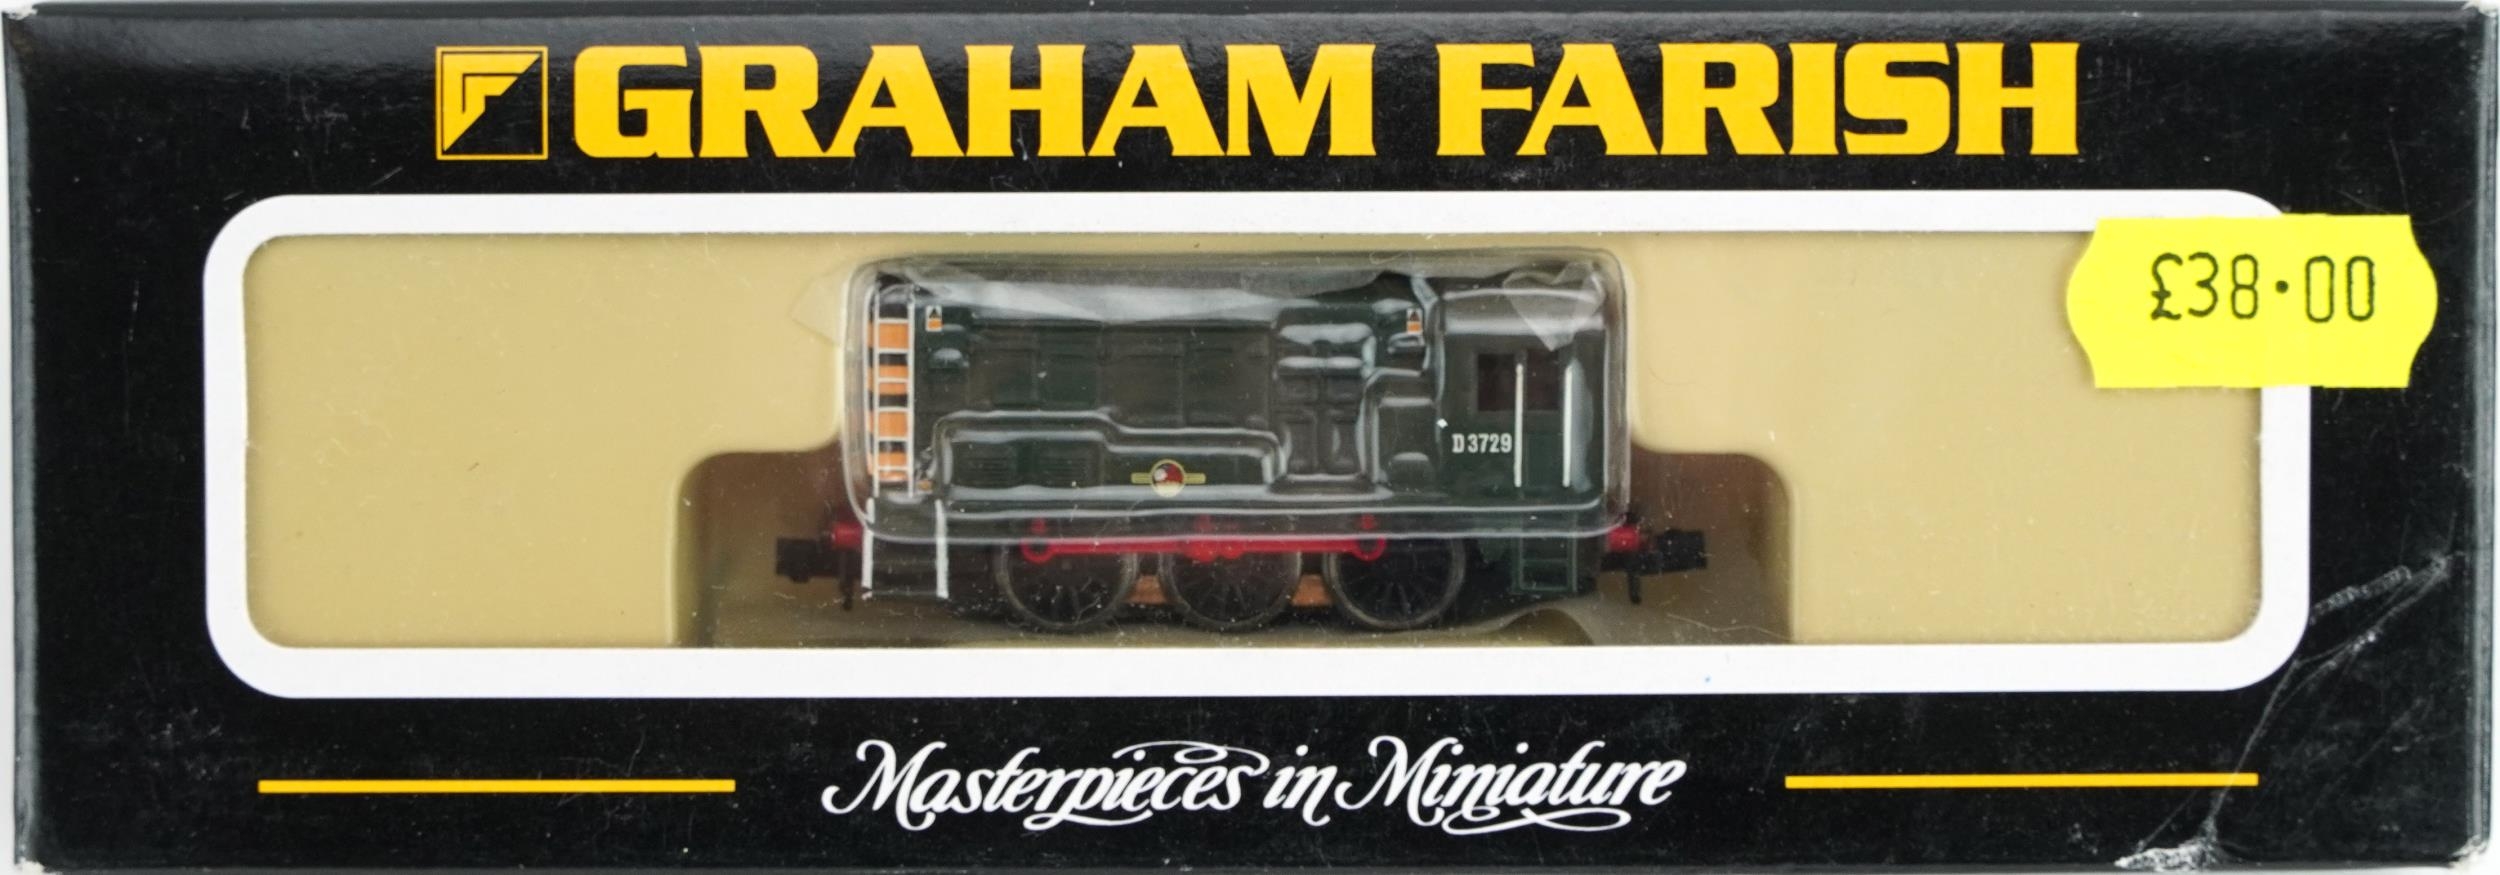 Two Graham Farish N gauge model railway locomotives with cases, numbers 371-001 and 371003 - Image 2 of 3